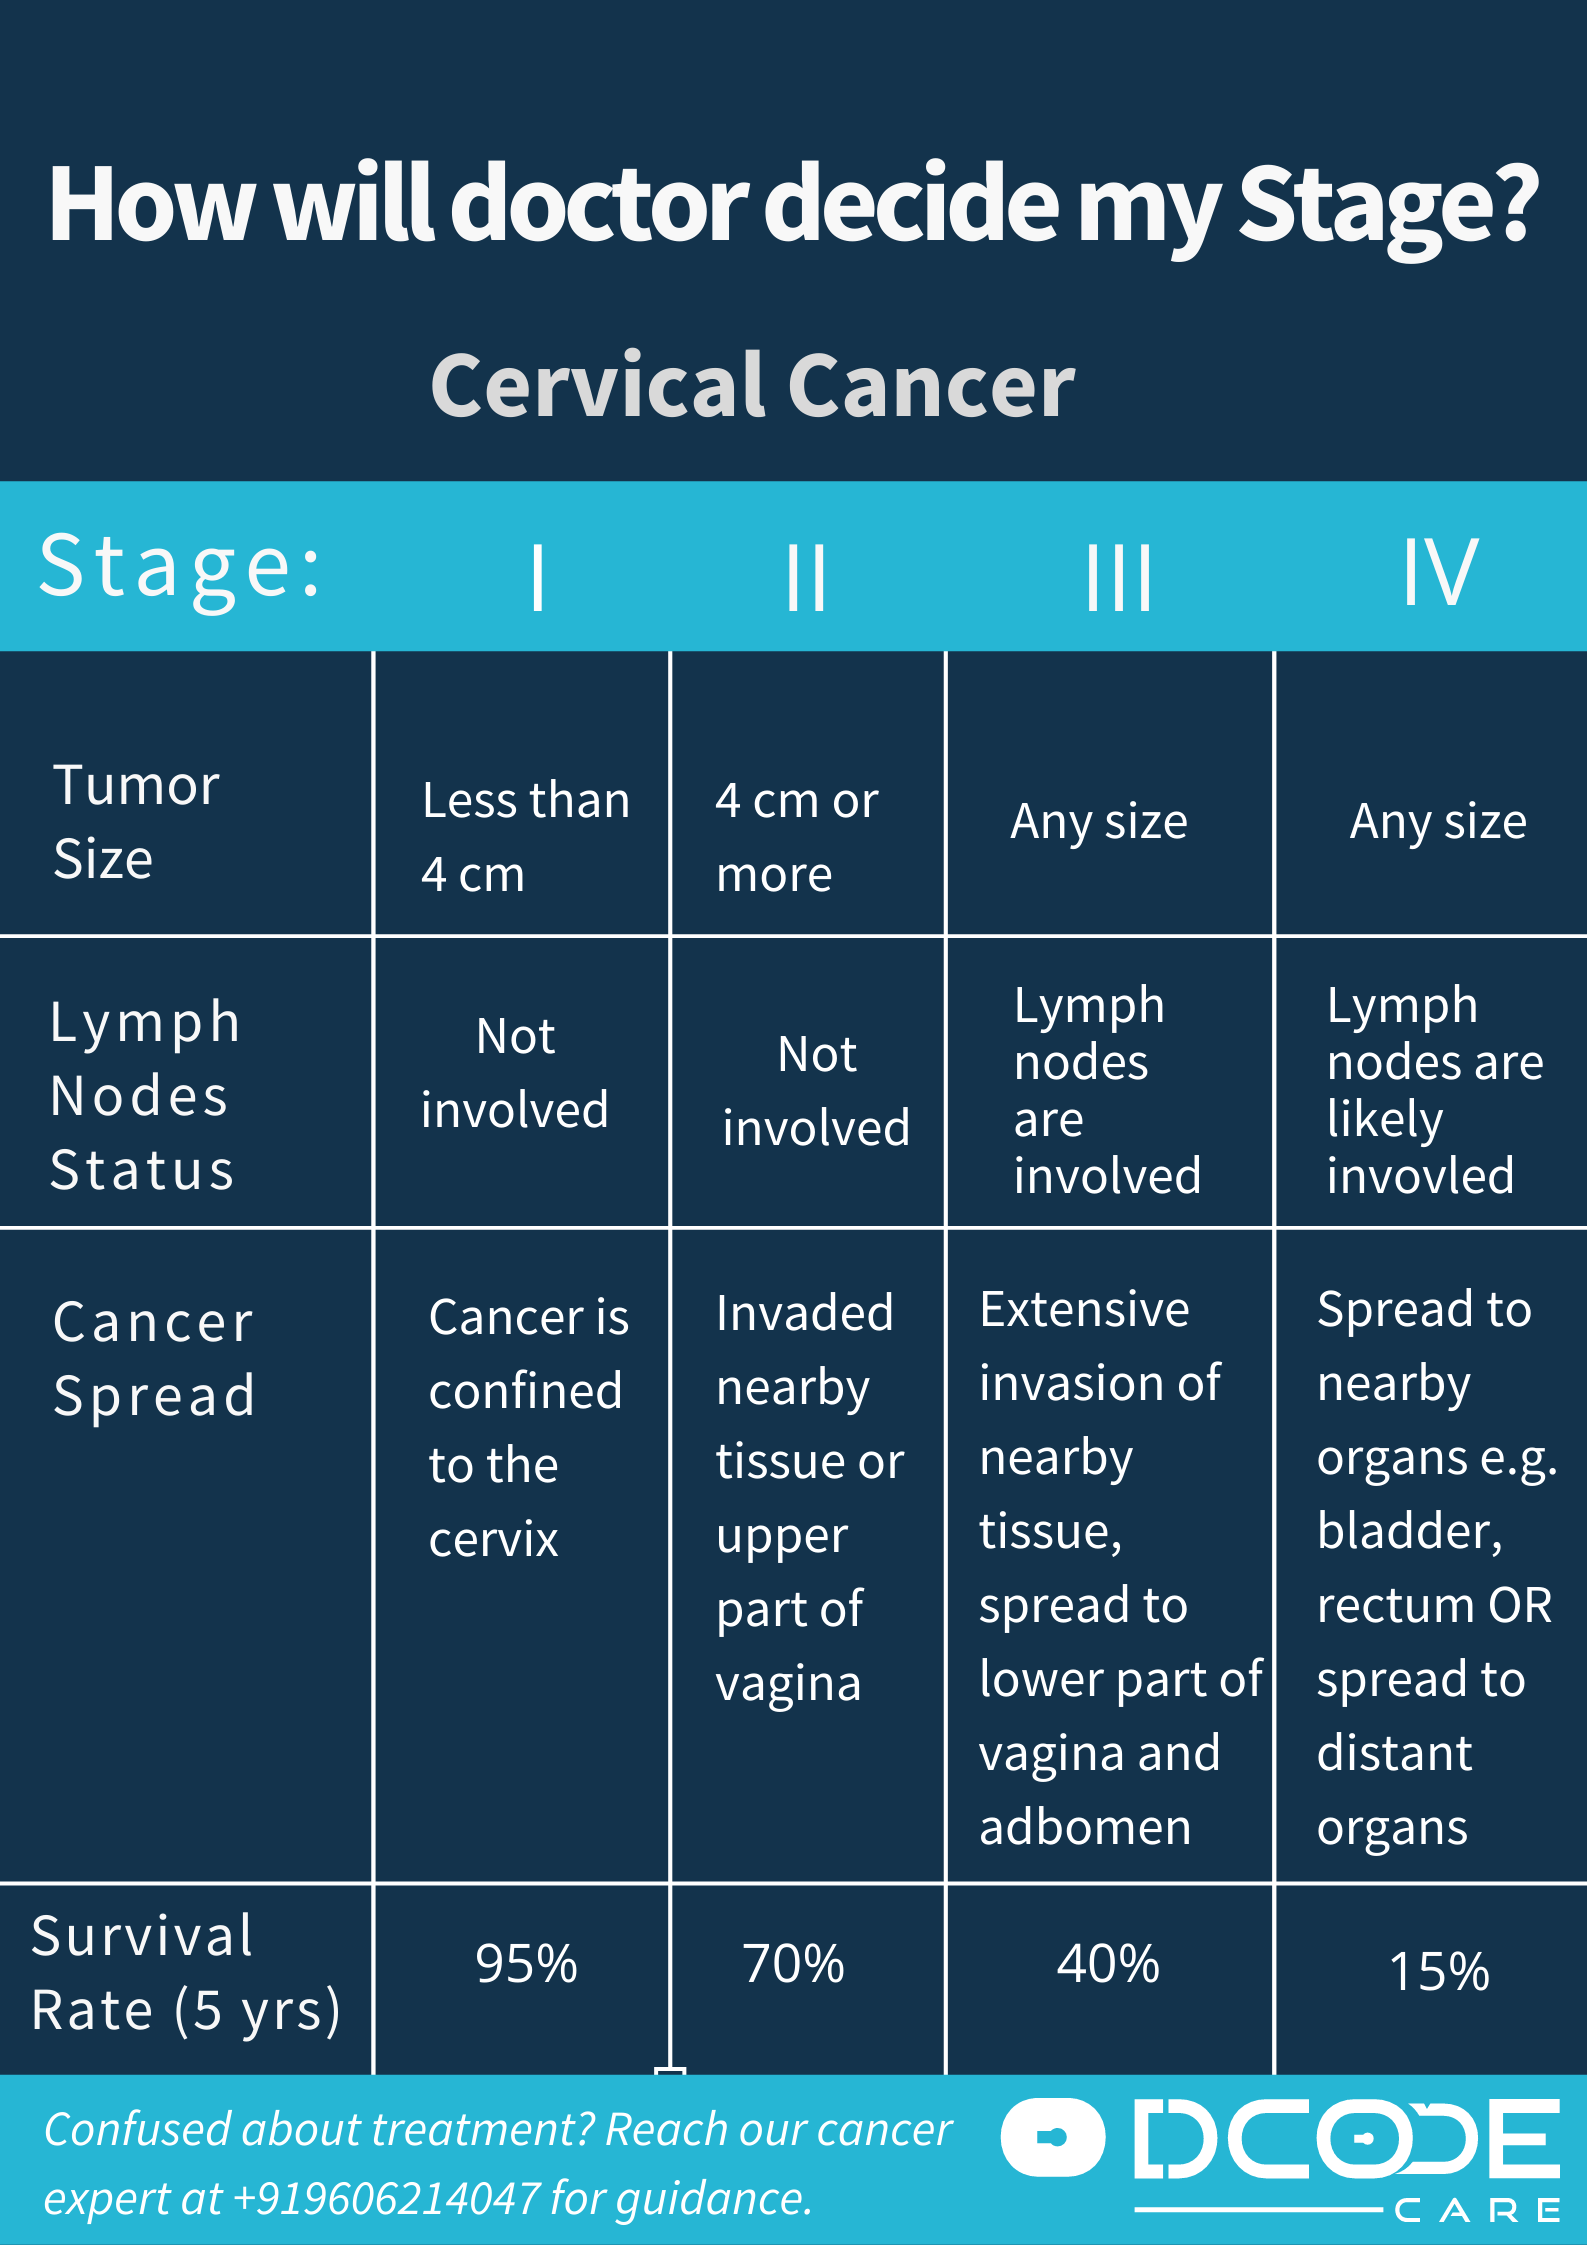 How will doctor decide my stage? Cervical Cancer.